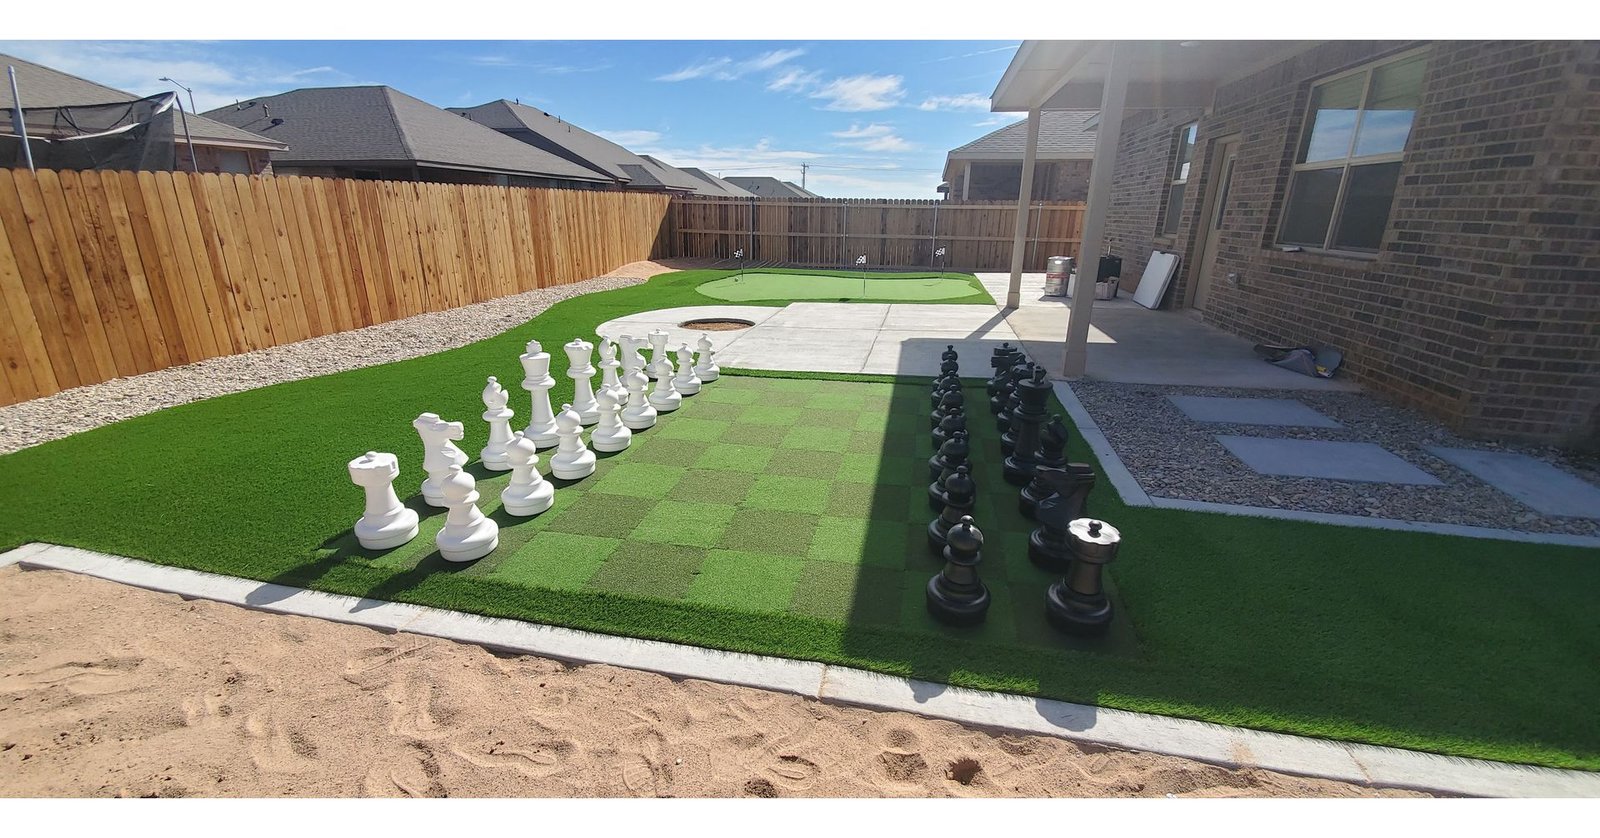 A backyard in Clearwater FL with a life-sized chessboard featuring large black and white chess pieces. Tampa Turf Solutions handled the artificial grass installation, which surrounds the area. The yard also includes a wooden fence, putting green, concrete patio with a covered section, and houses in the background.